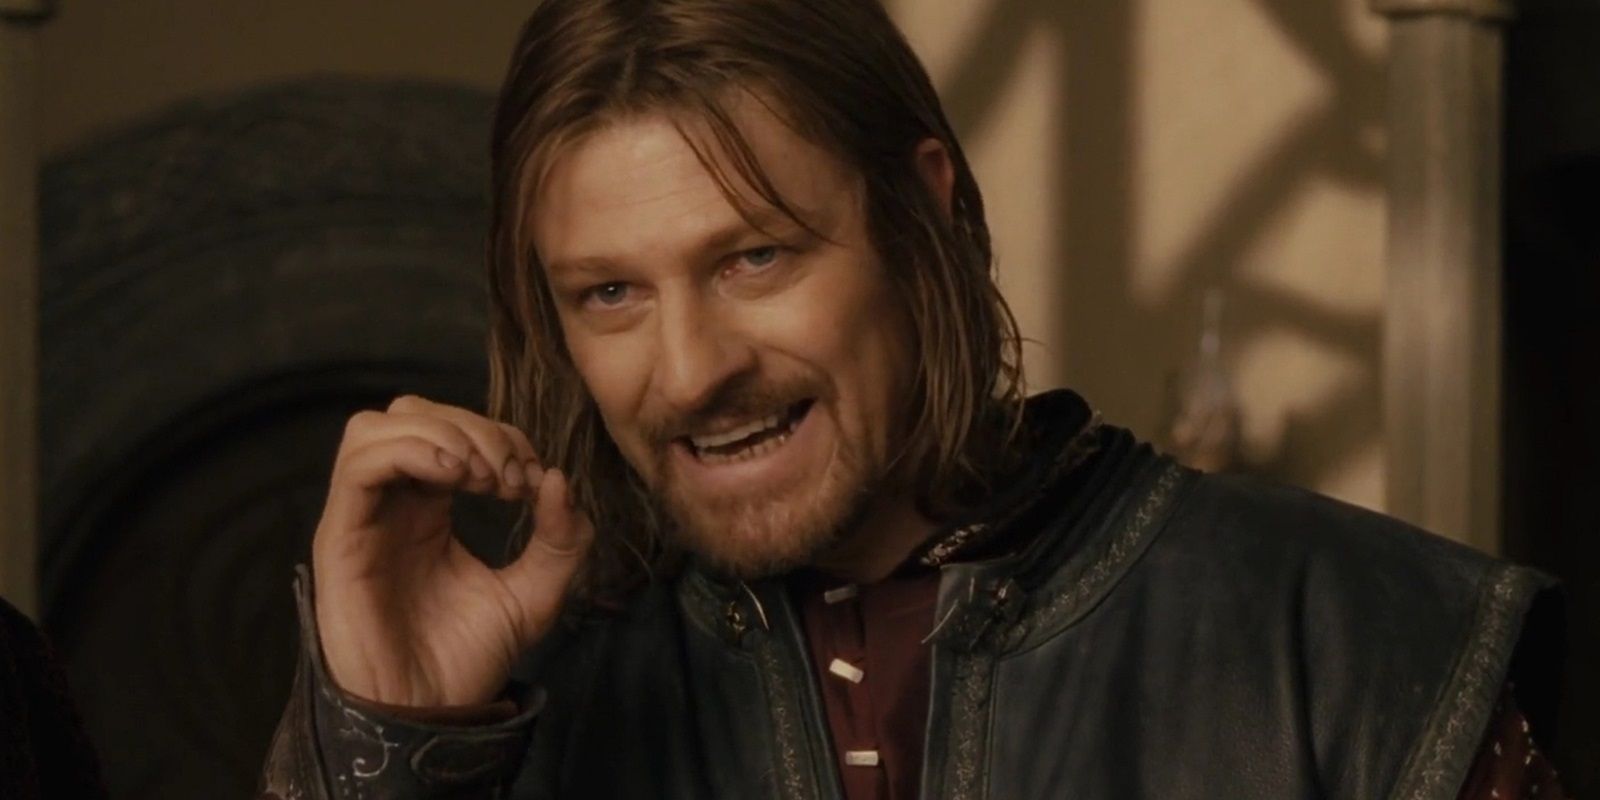 Boromir says 'One does not simply walk into mordor' in The Fellowship of the Ring